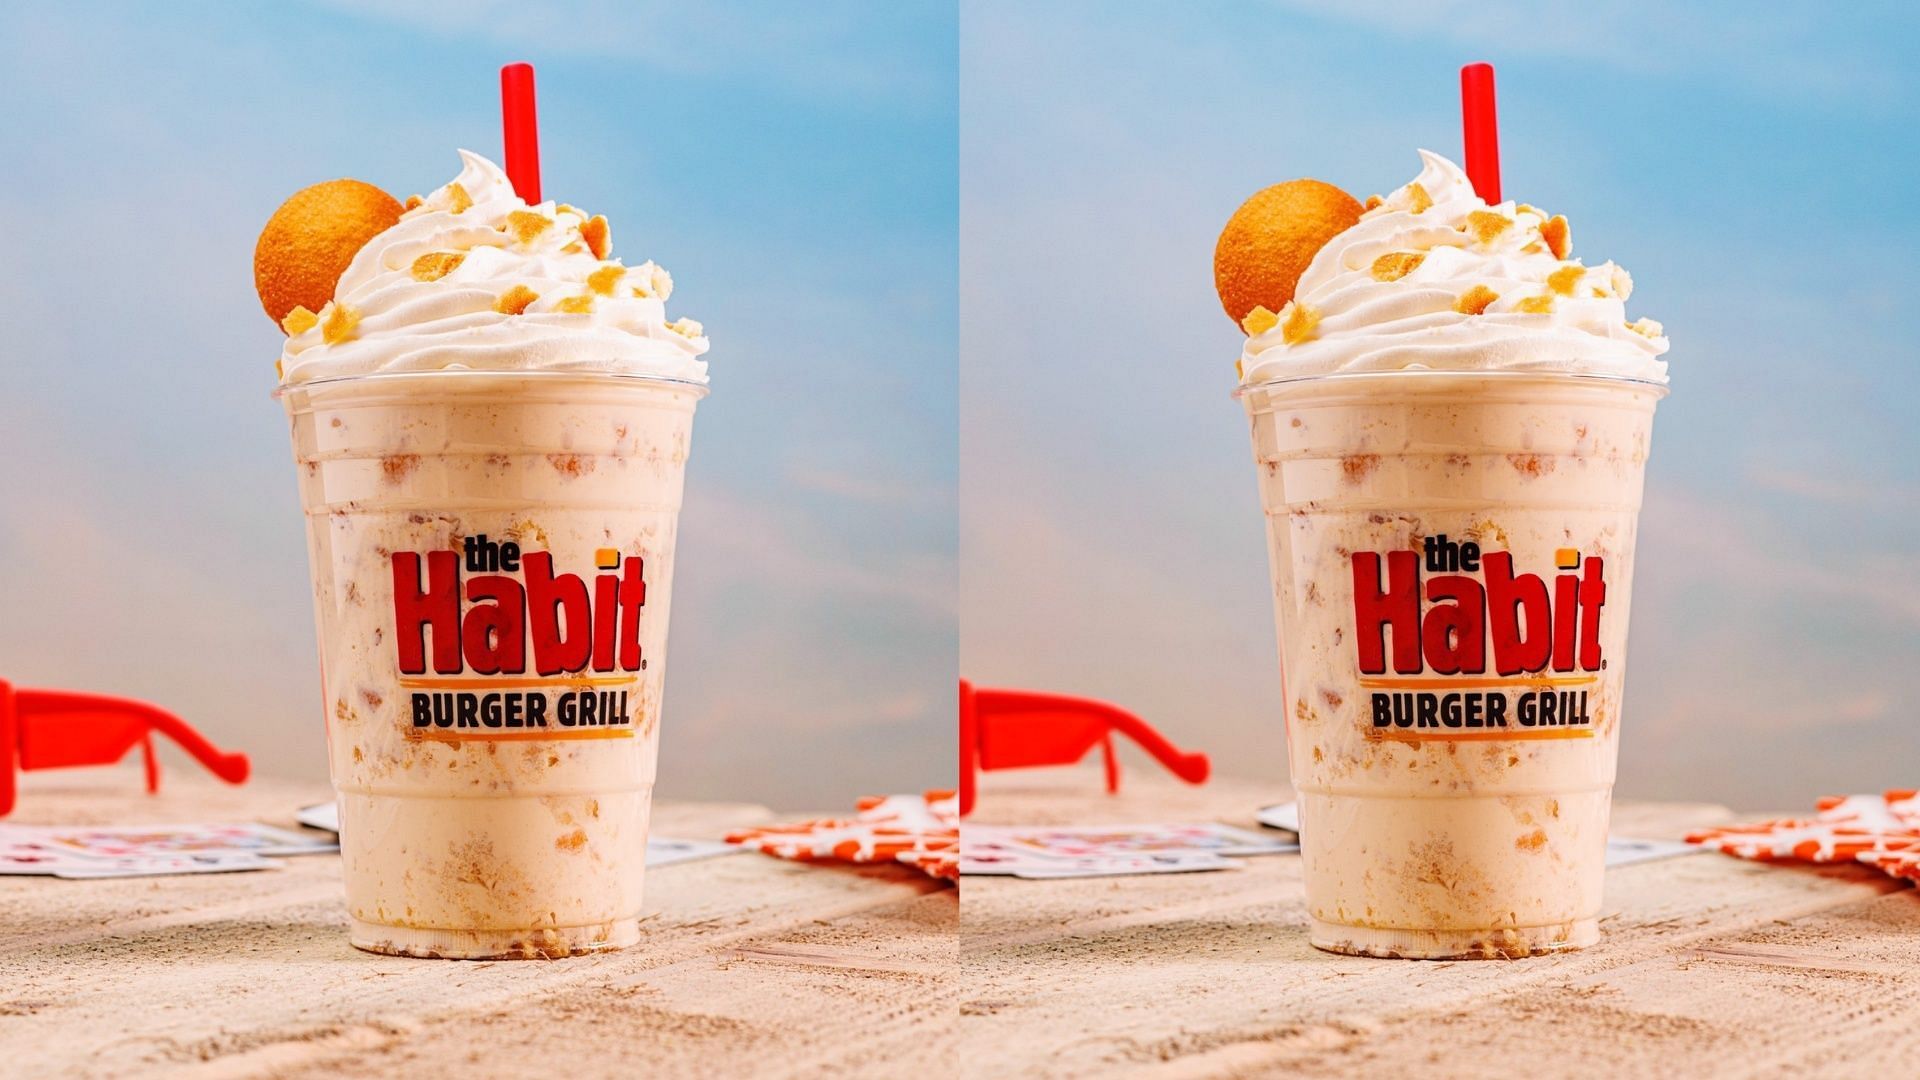 The new Banana Wafer Shake starts at over $5 and will only be available on the menu for a limited time (Image via The Habit Burger Grill)